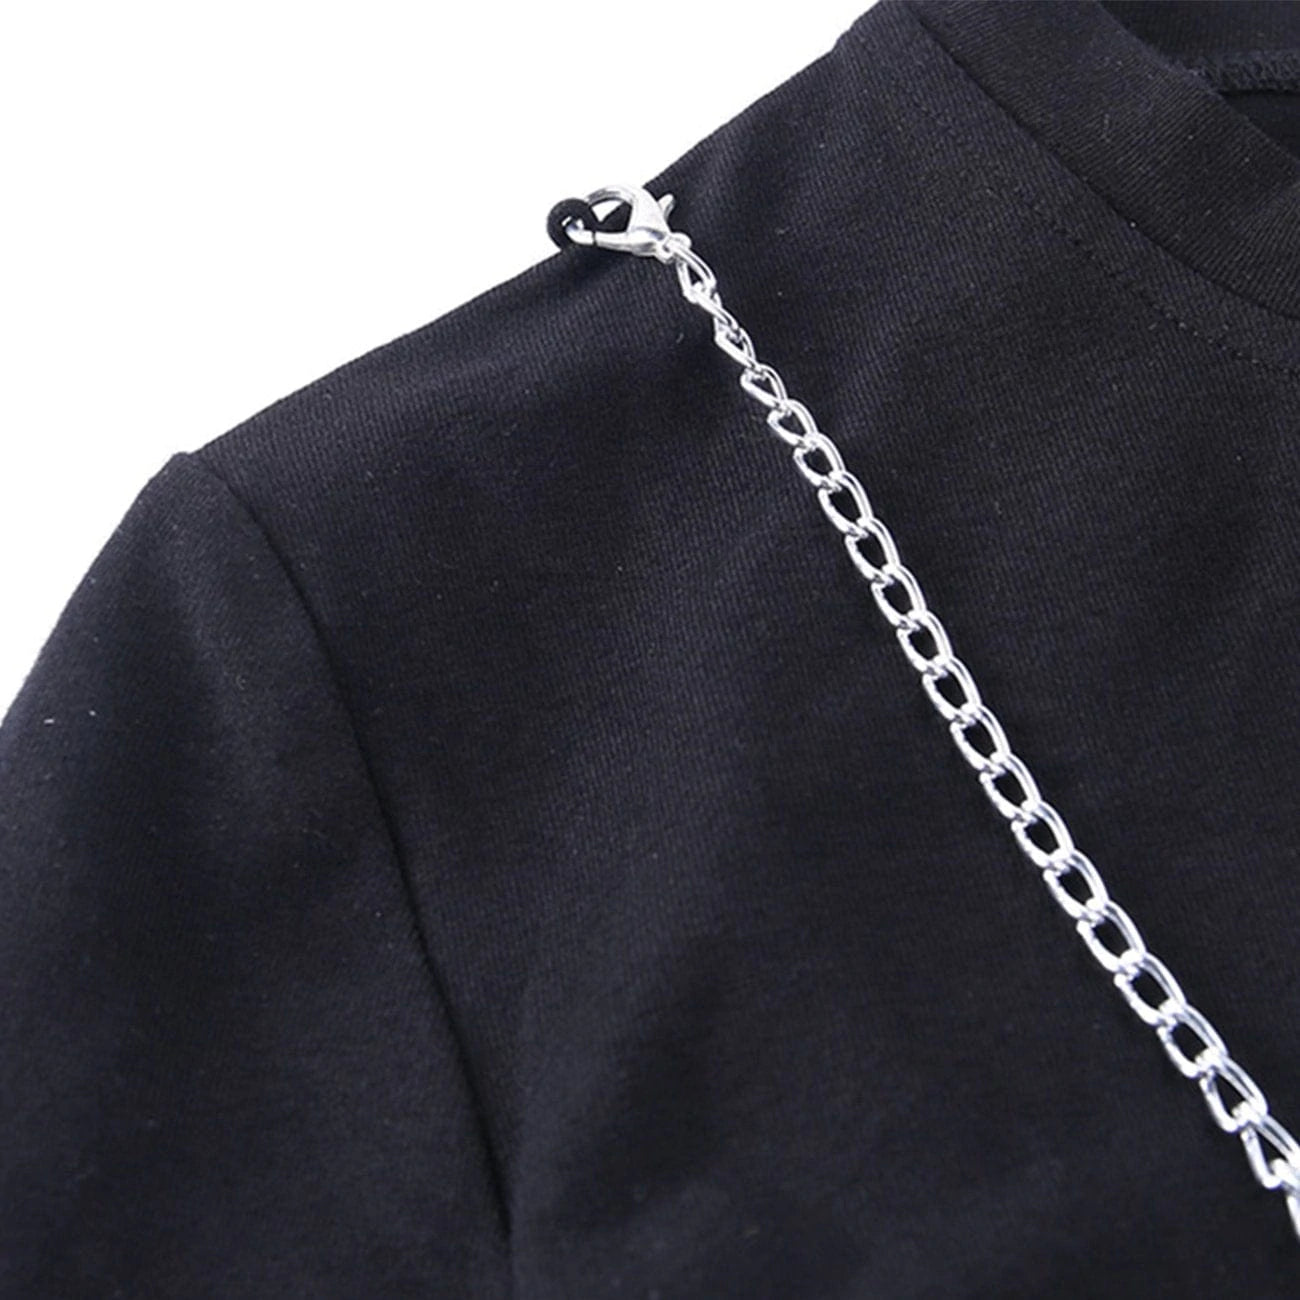 WLS Chain Accessories Long Sleeve Tee